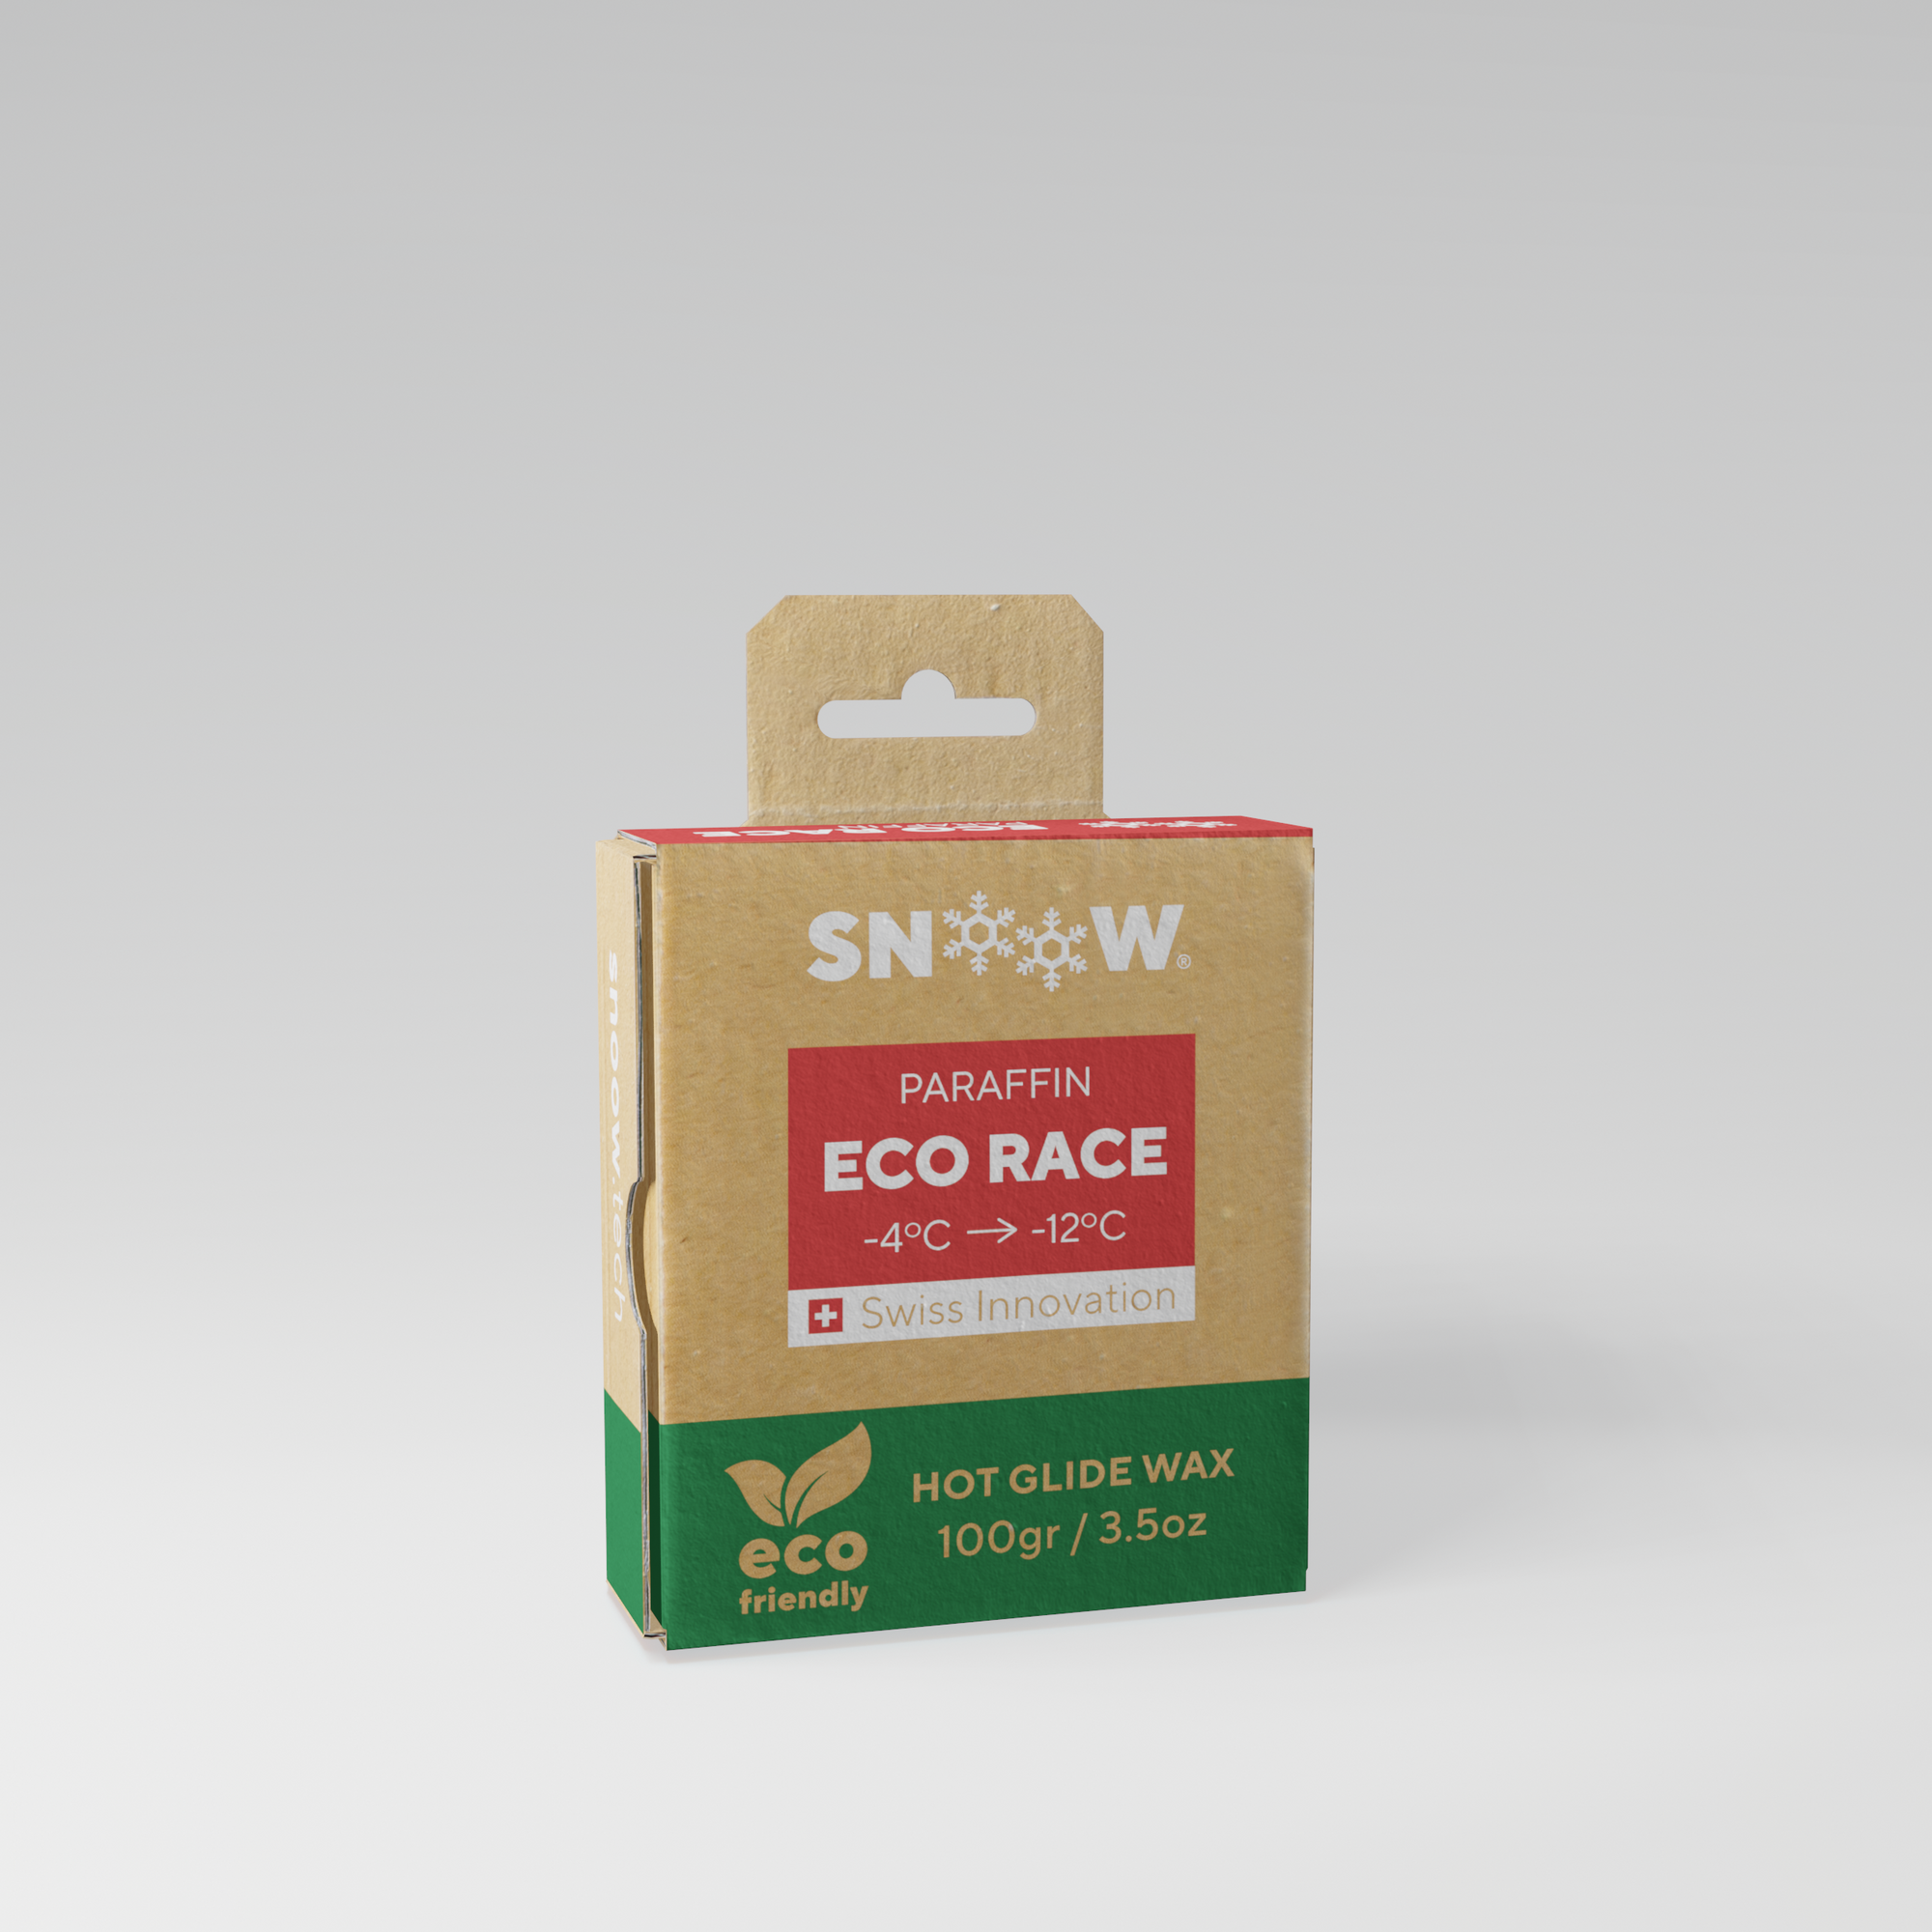 ECO RACE PARAFFIN SKI WAX - Red 100gr